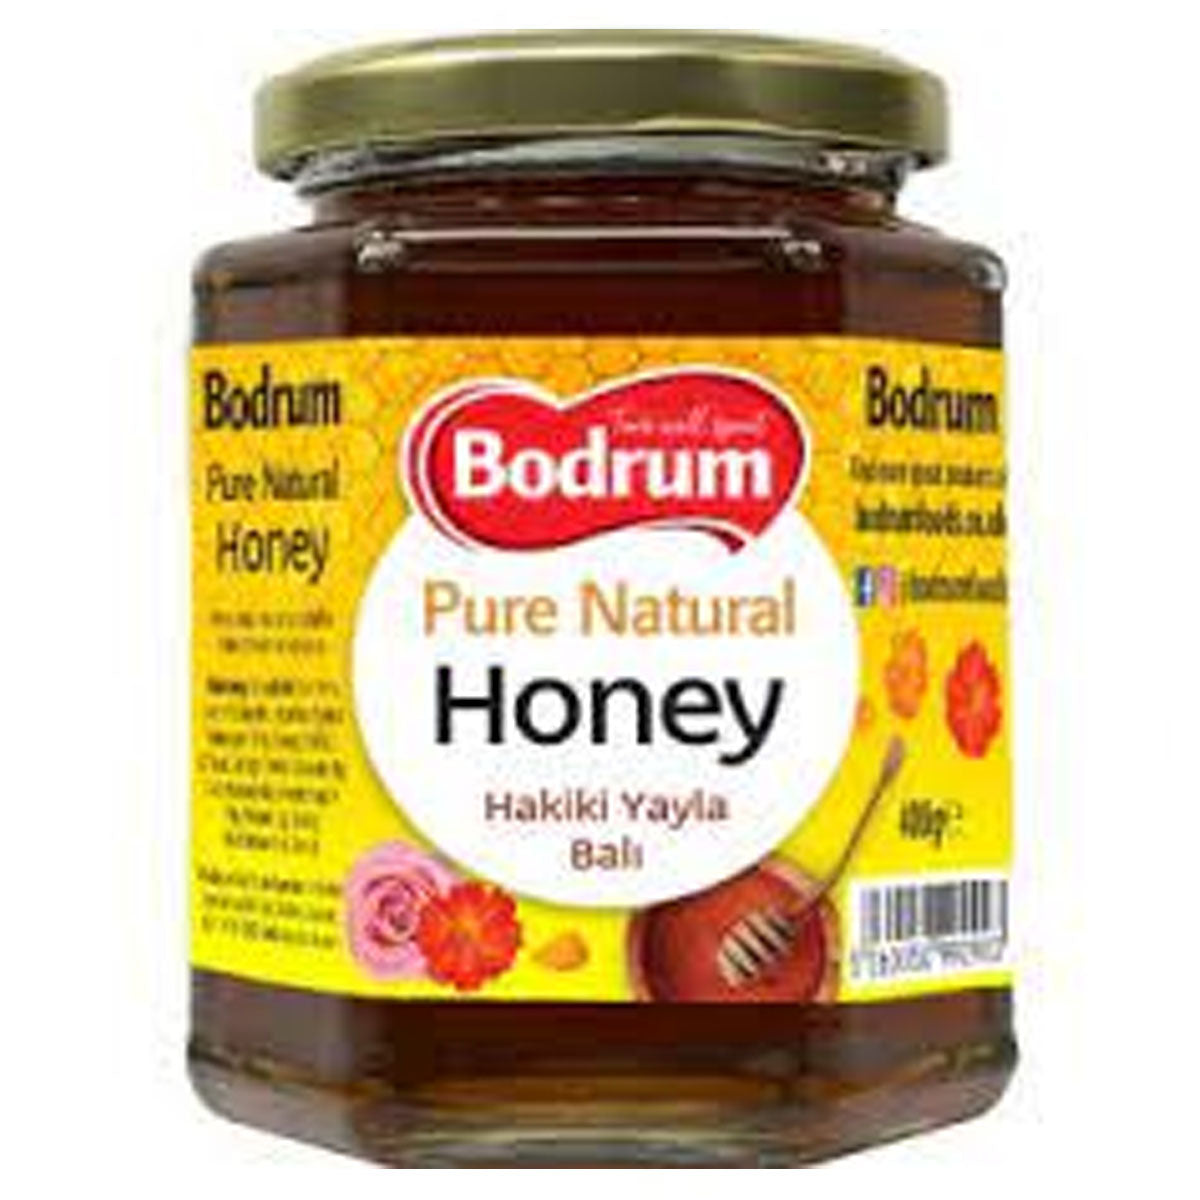 Bodrum - Pure Natural Honey - 400g - Continental Food Store